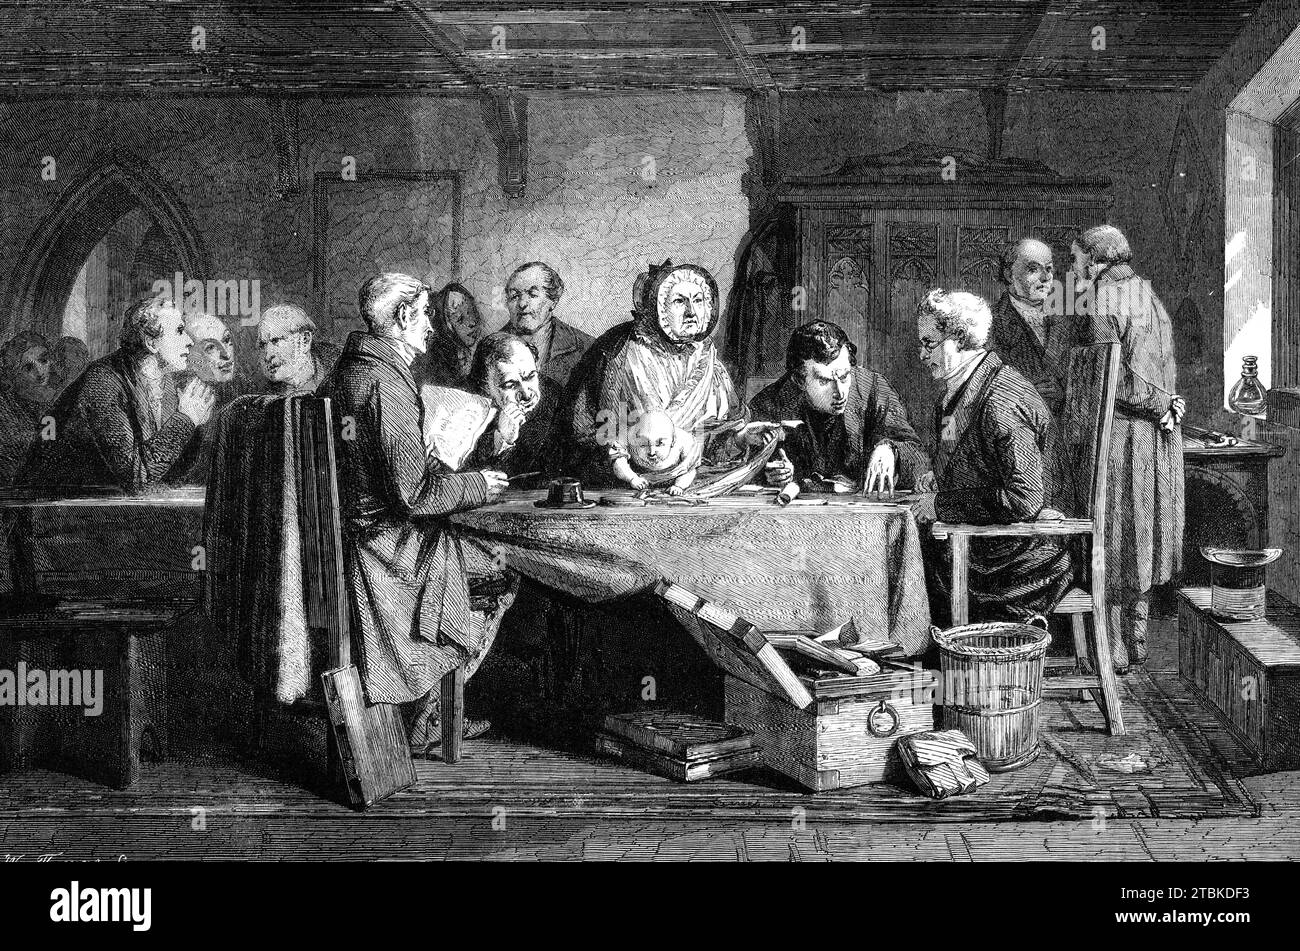 &quot;The Foundling&quot;, by G. B. O'Neill, in the National Gallery, South Kensington Museum, 1861. Engraving of a painting. 'Round the table of the boardroom in the union-house the guardians are assembled - hard, matter-of-fact men - examining a child which has been found in the street. The nurse who has it in charge is an admirable study...her broad, well-filled, but wrinkled countenance speaking of many creature comforts taken on the sly, her air of importance well befitting her important calling...We are told...that this personage is an exact portrait of some official original. The beadle Stock Photo